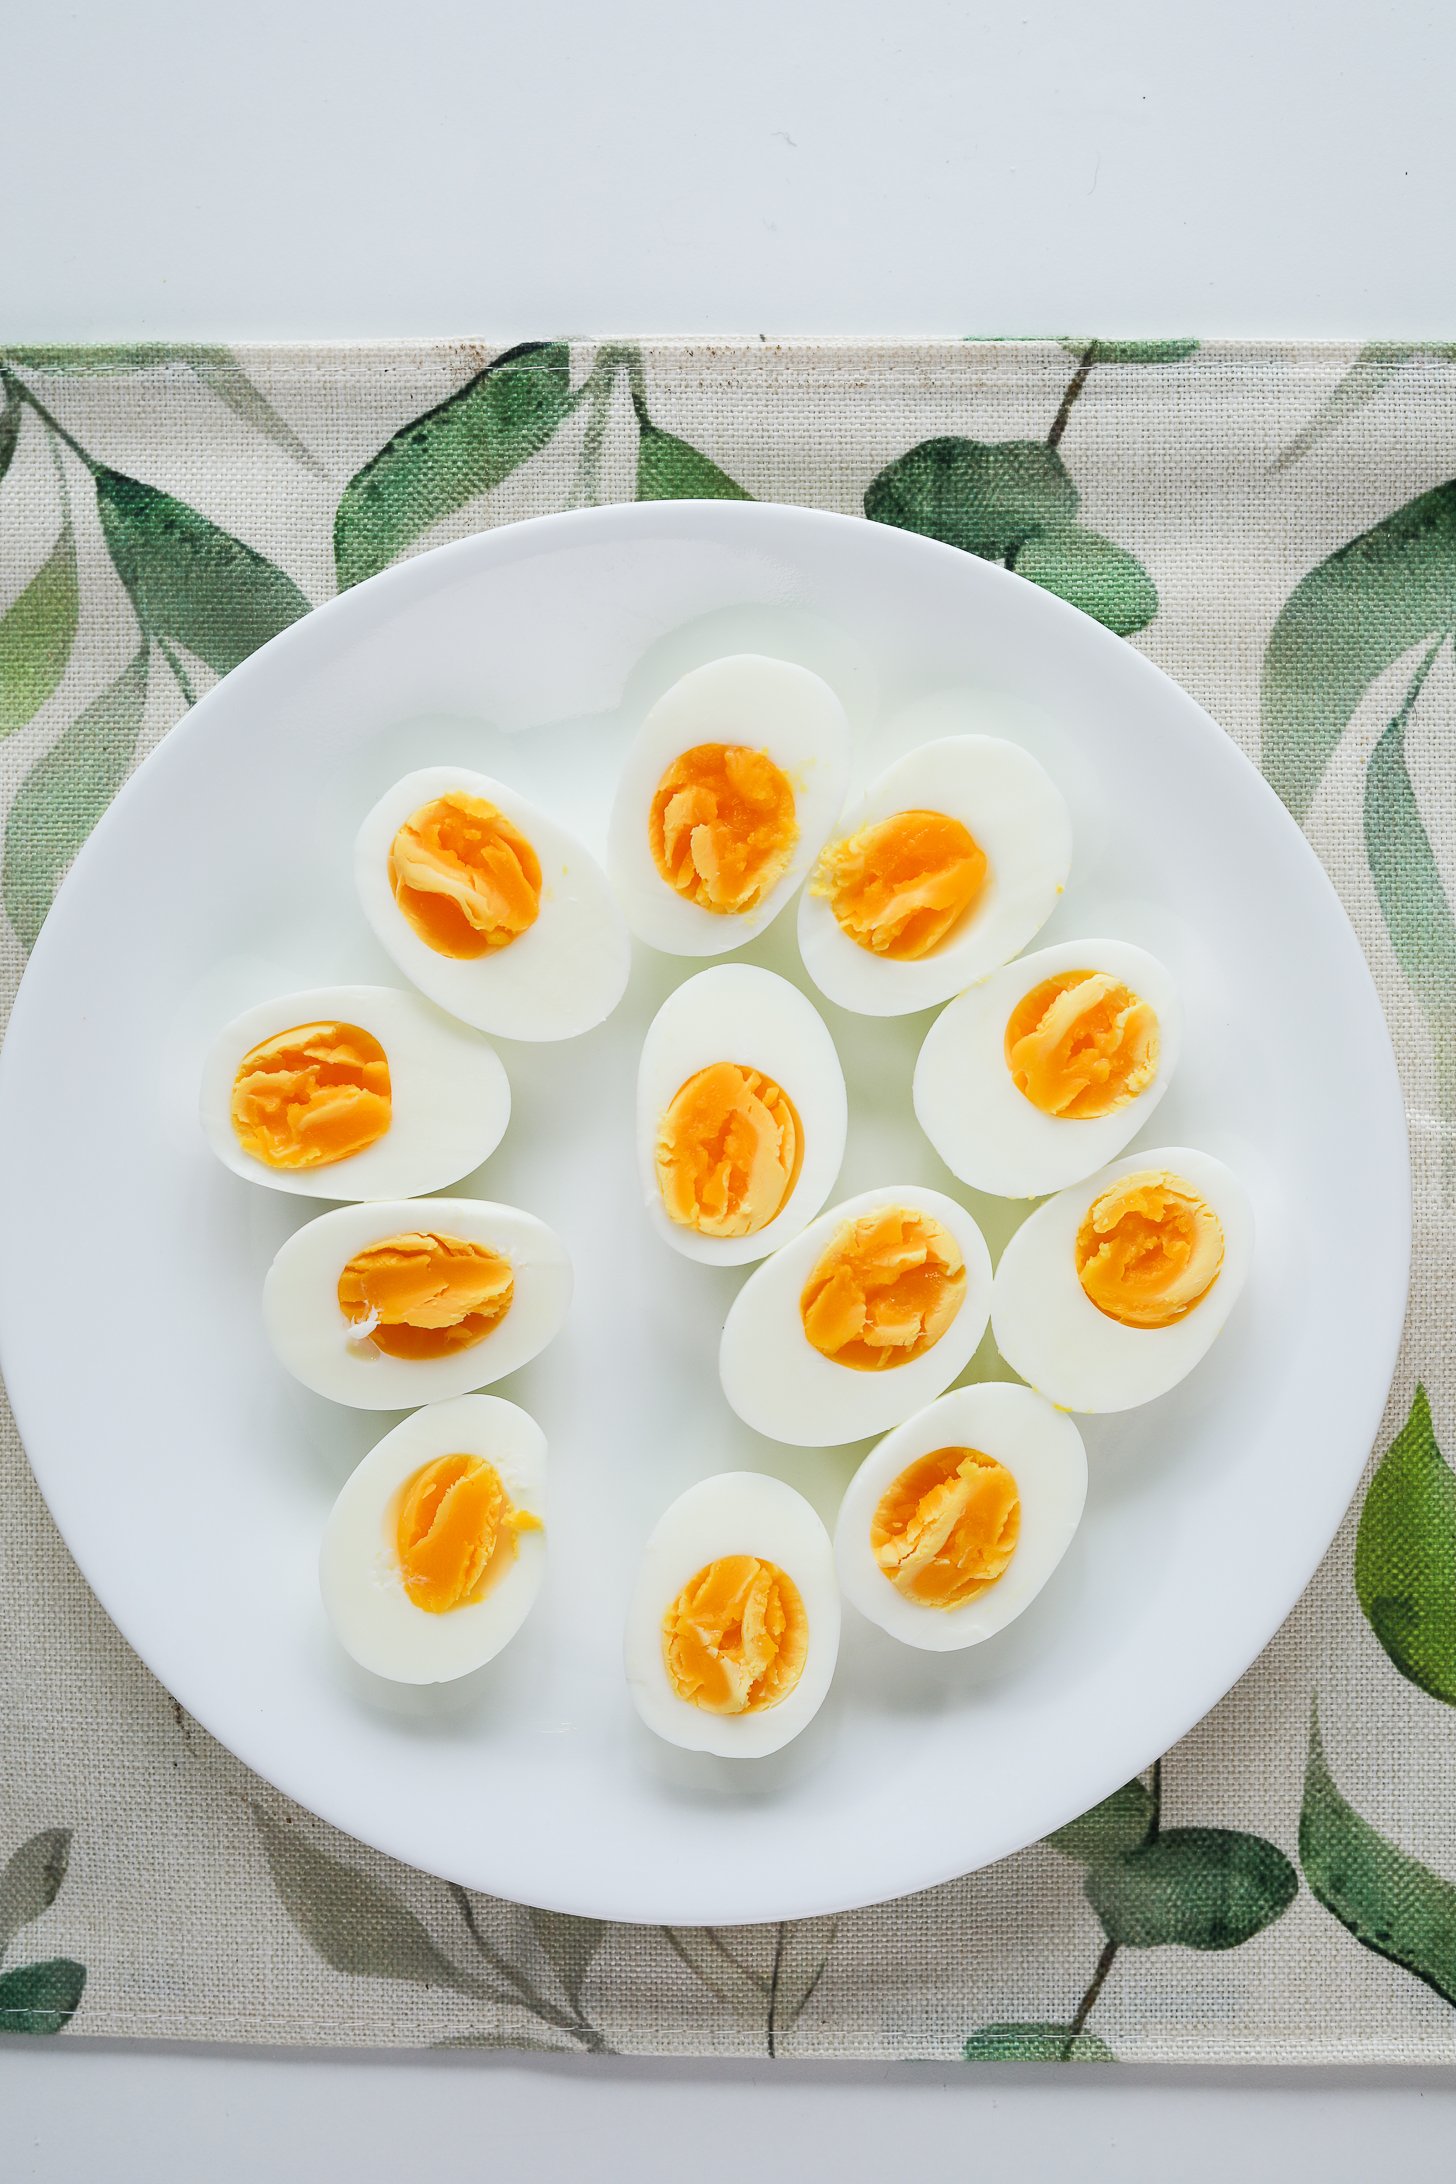 Top view of plate of sliced boiled eggs.